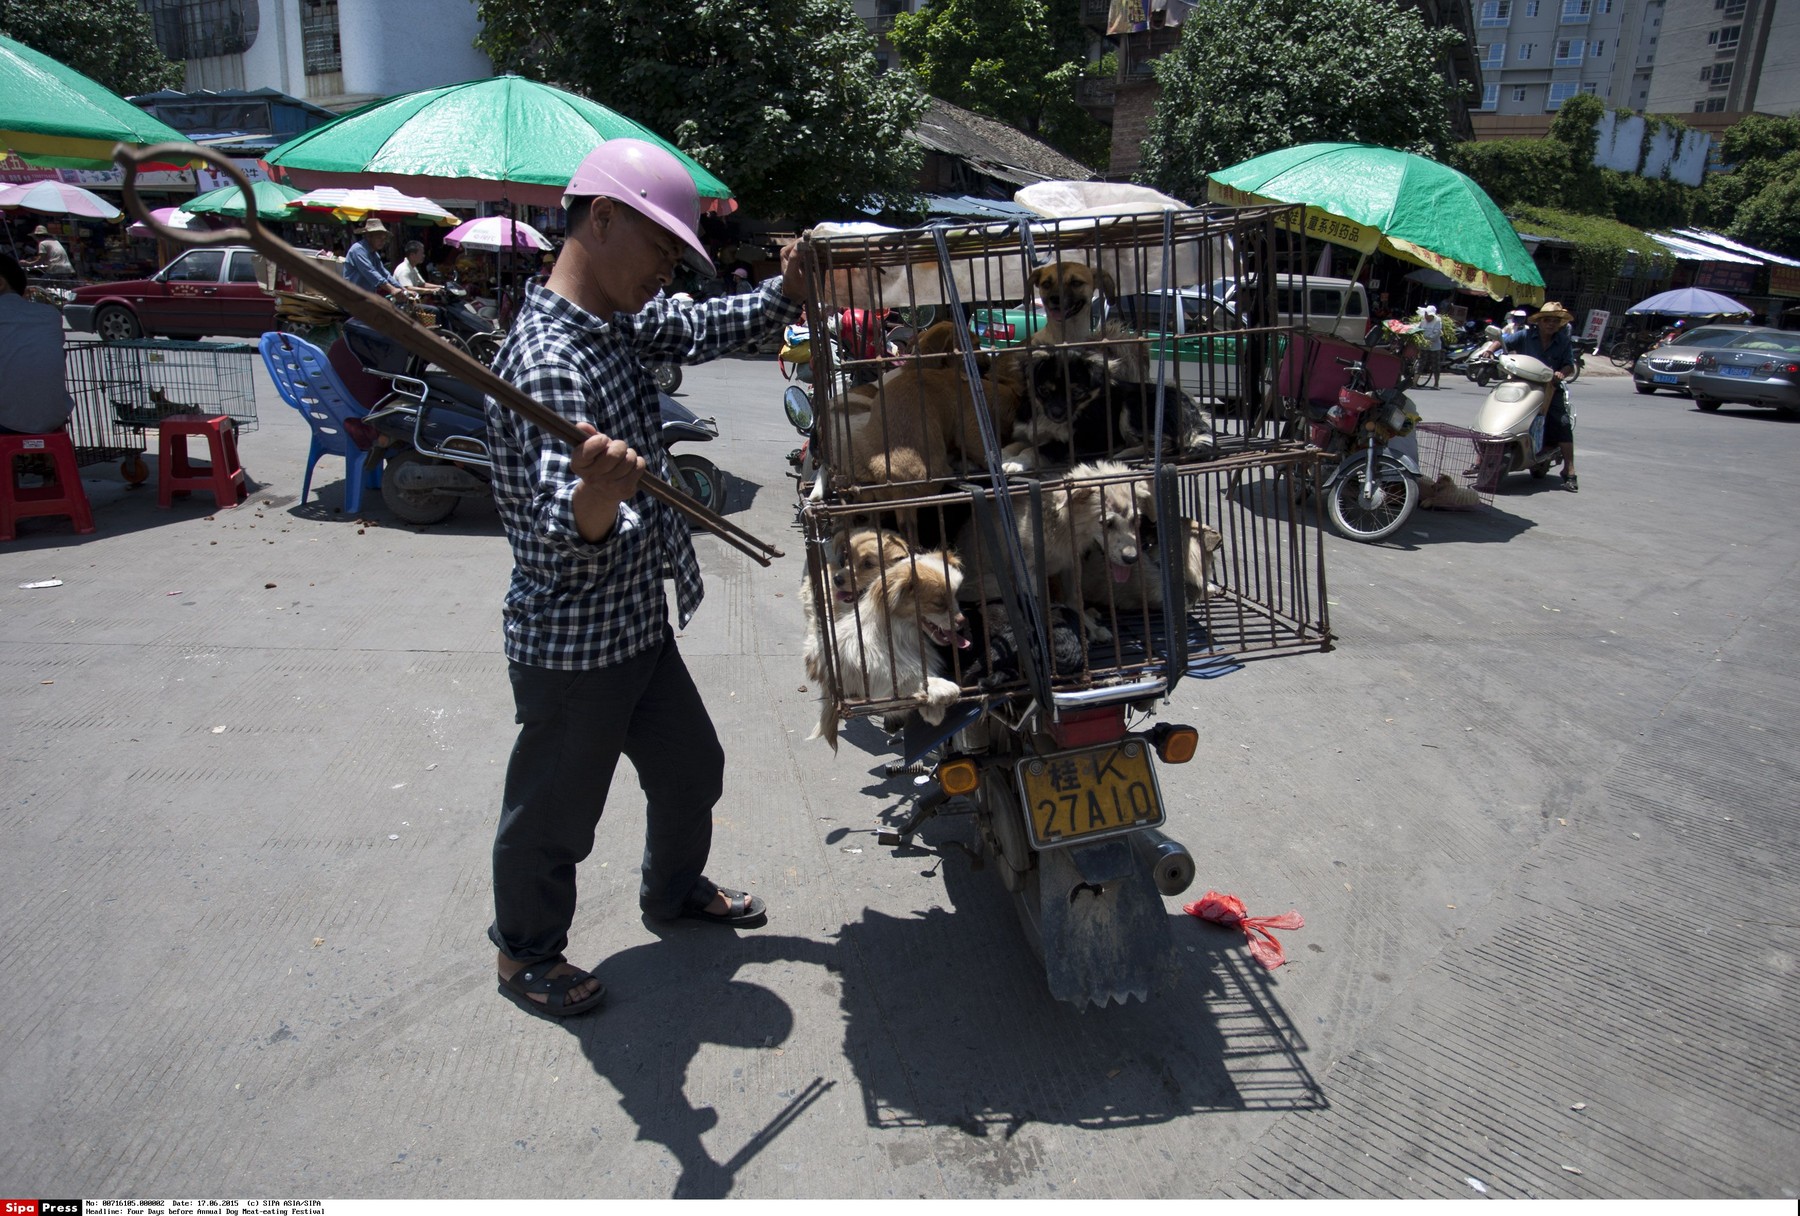 Yulin, CHINA - June 17 2015: (EDITORIAL USE ONLY. CHINA OUT) A man is selling dogs at Dongkou Market. The controversial annual dog meat-eating festival will be held on the summer solstice (June 21) in Yulin, Guangxi Zhuang autonomous region, when a mass of dogs are likely to be slaughtered and served as hotpots with litchis and strong liquor./SIPAASIA_120102/Credit:SIPA ASIA/SIPA/1506181205, Image: 250251900, License: Rights-managed, Restrictions: , Model Release: no, Credit line: SIPA ASIA / Sipa Press / Profimedia